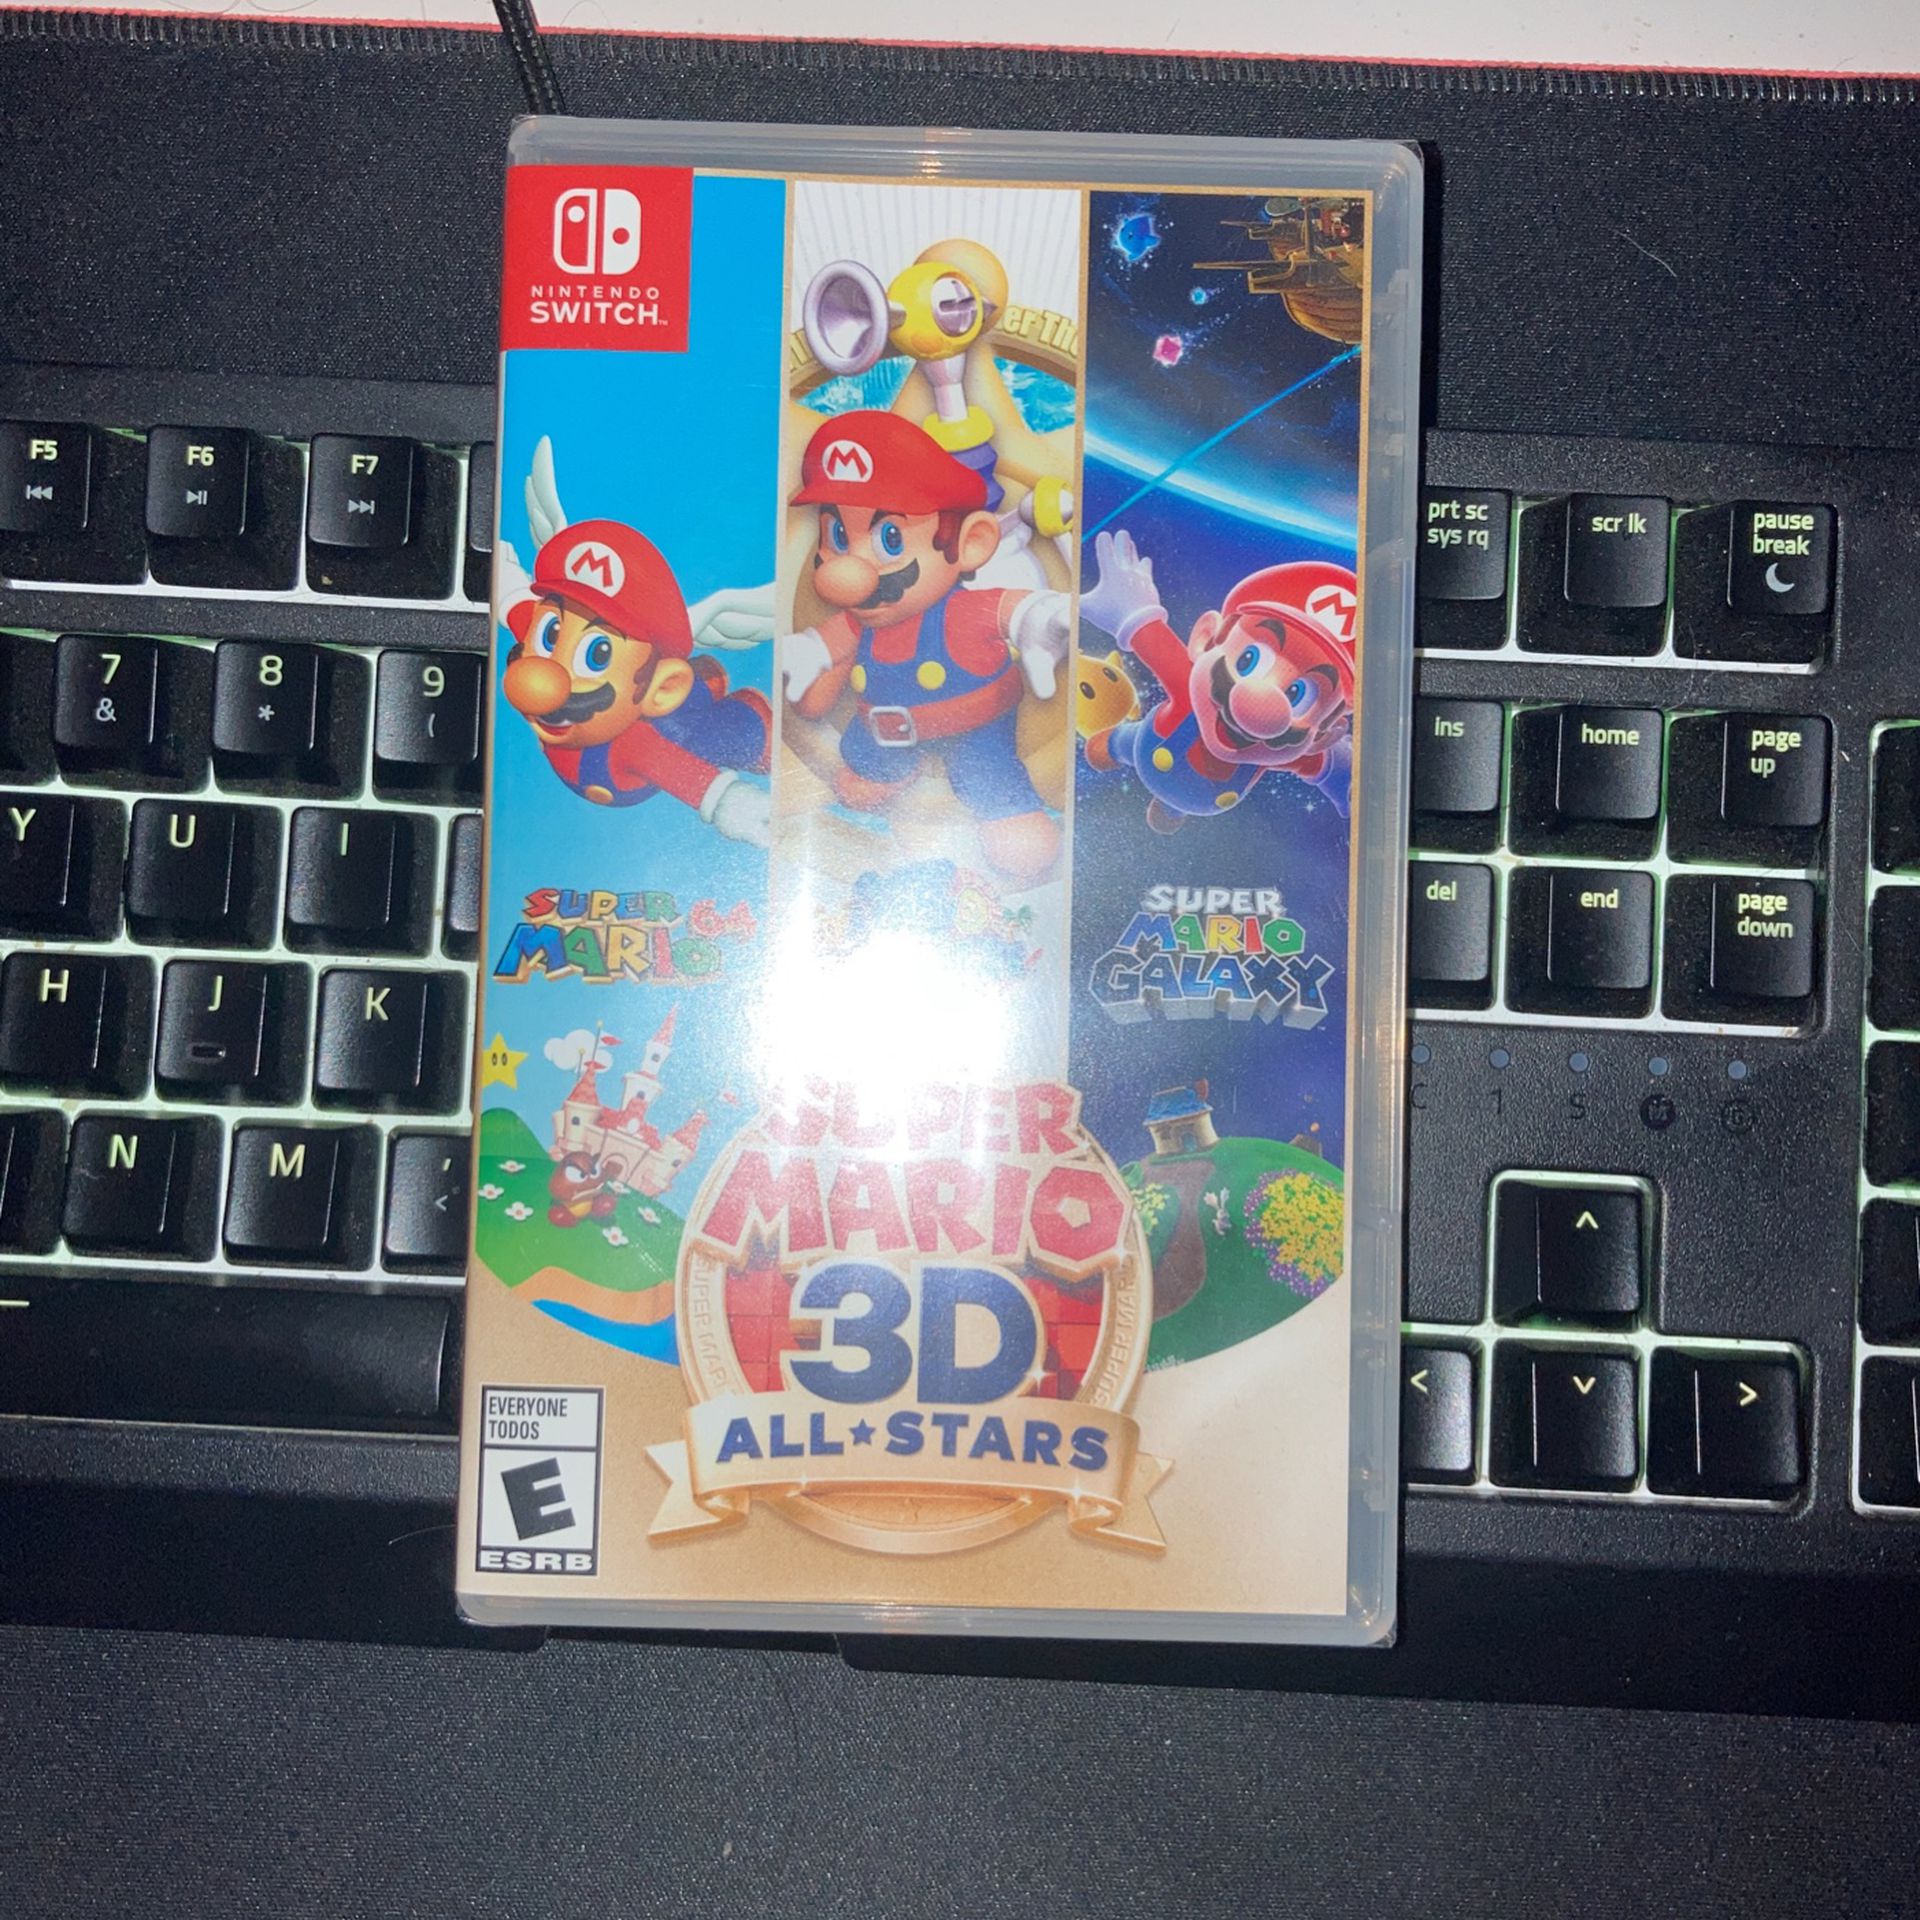 Super Mario 3D All-Stars, Wrapped and sealed,  never opened